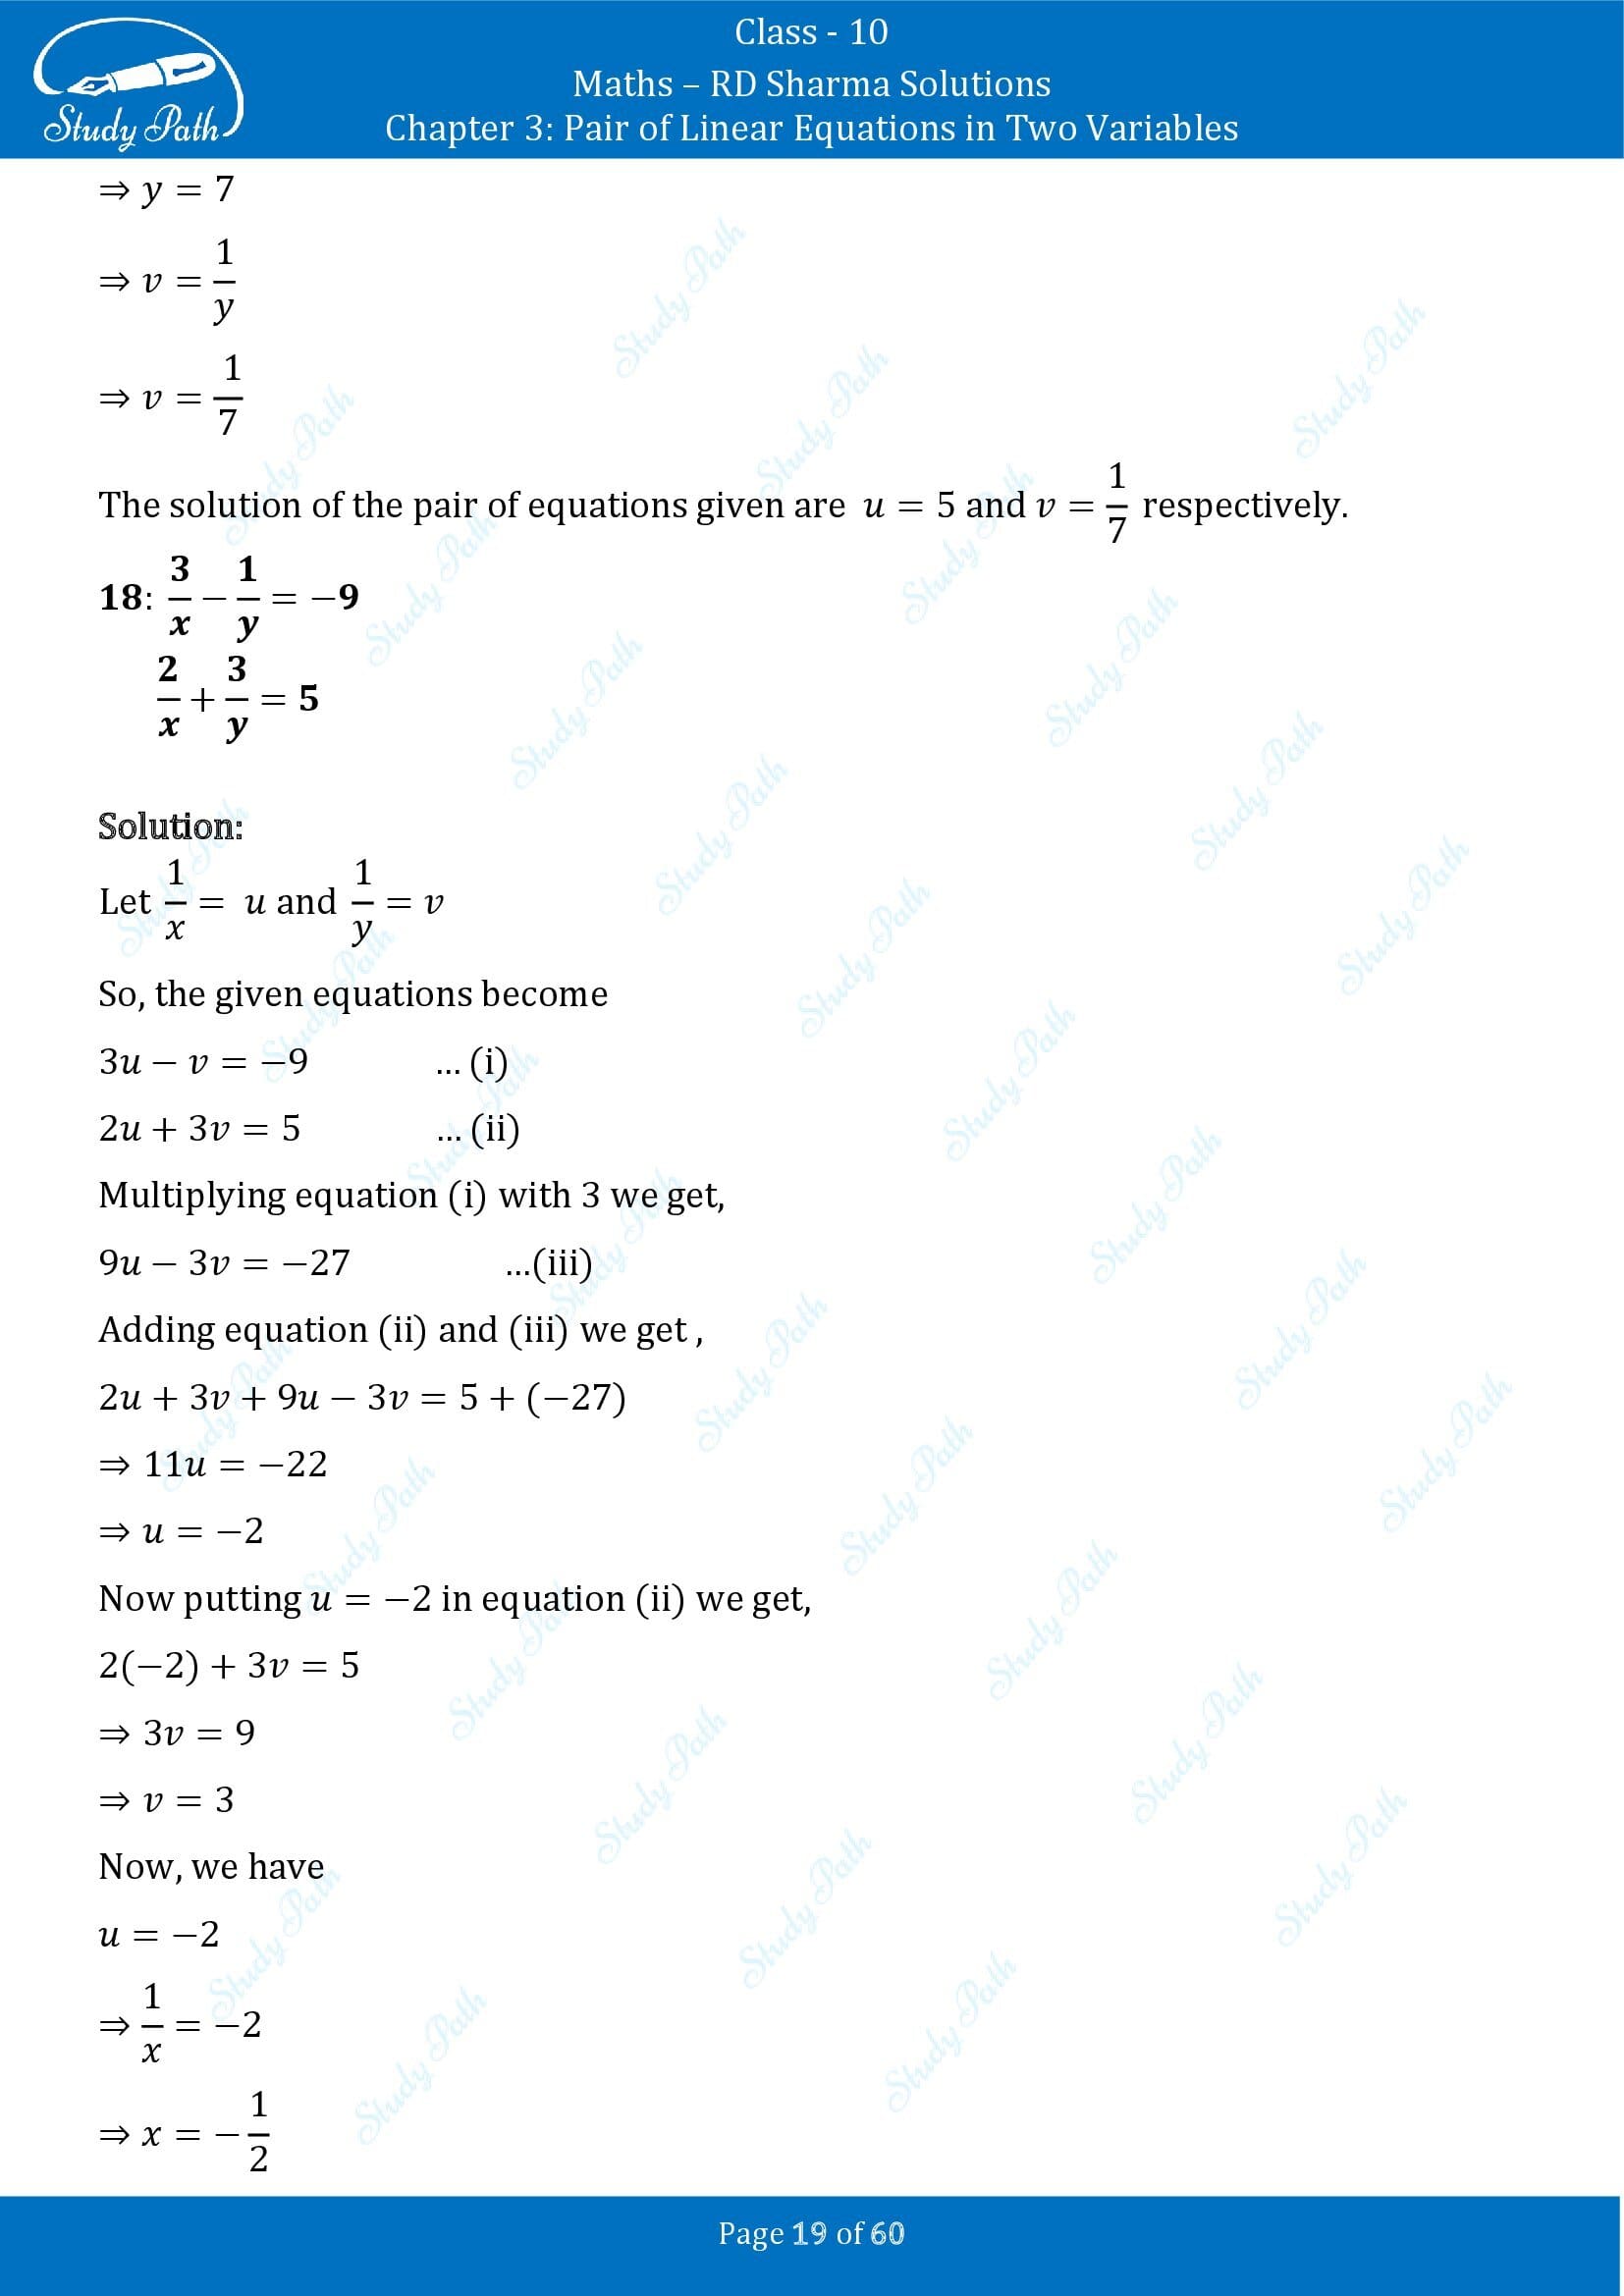 RD Sharma Solutions Class 10 Chapter 3 Pair of Linear Equations in Two Variables Exercise 3.3 00019